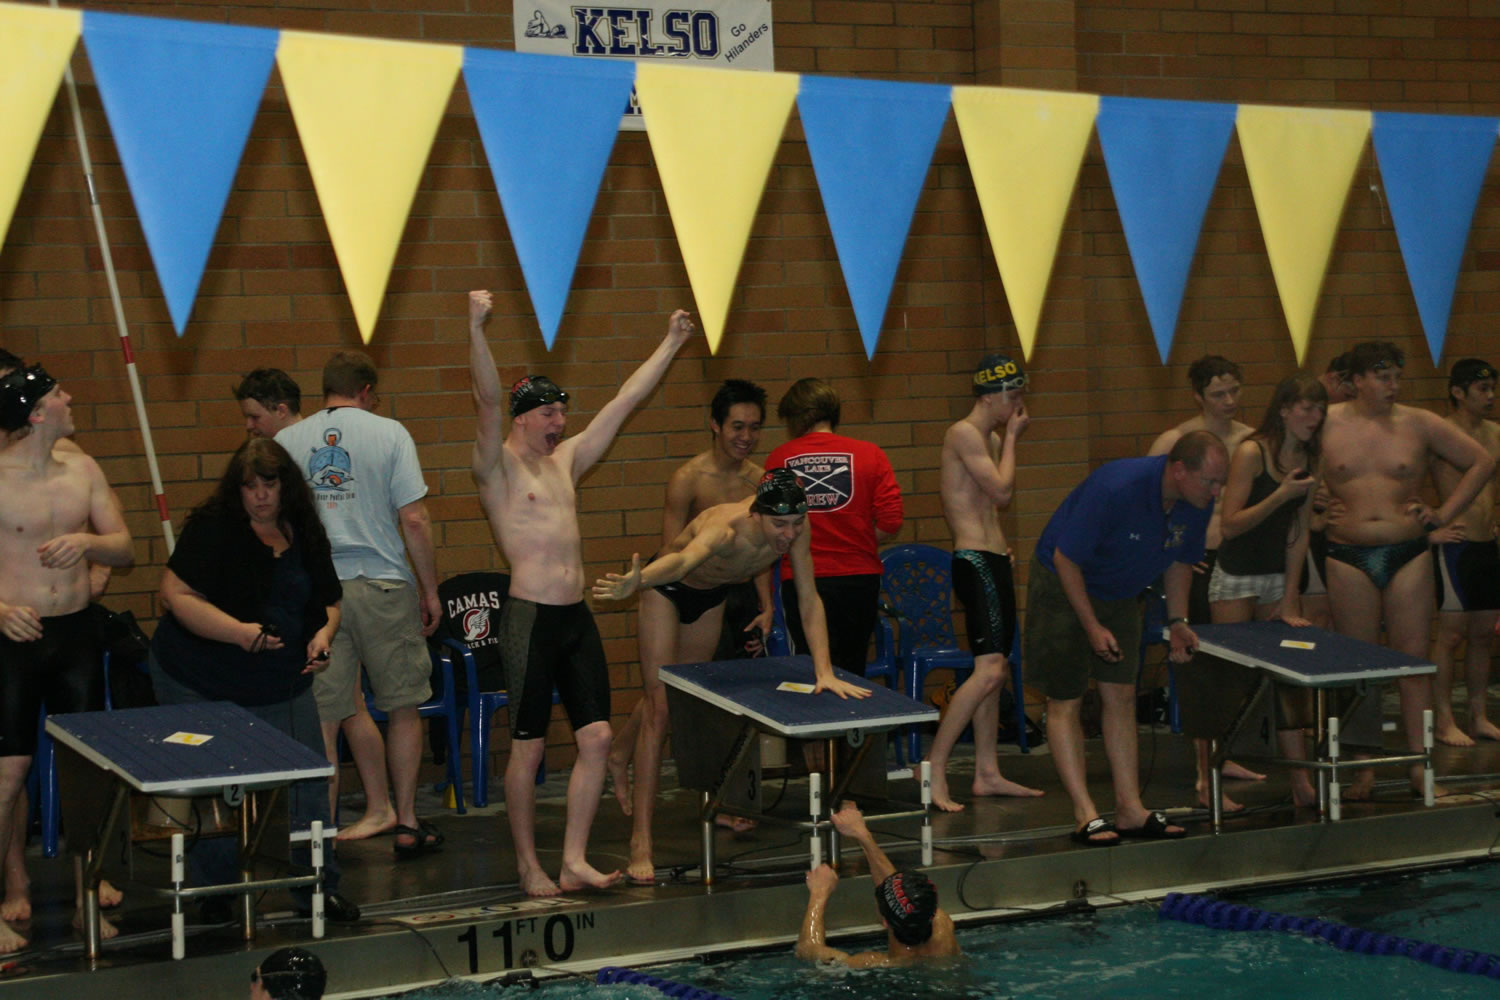 Camas swimmers Nick Kabel, Kasey Calwell and Trent Harimoto (left to right) celebrate with John Utas after they set a new Kelso swimming pool record time of 1 minute, 32.02 seconds in the 200-meter freestyle relay.